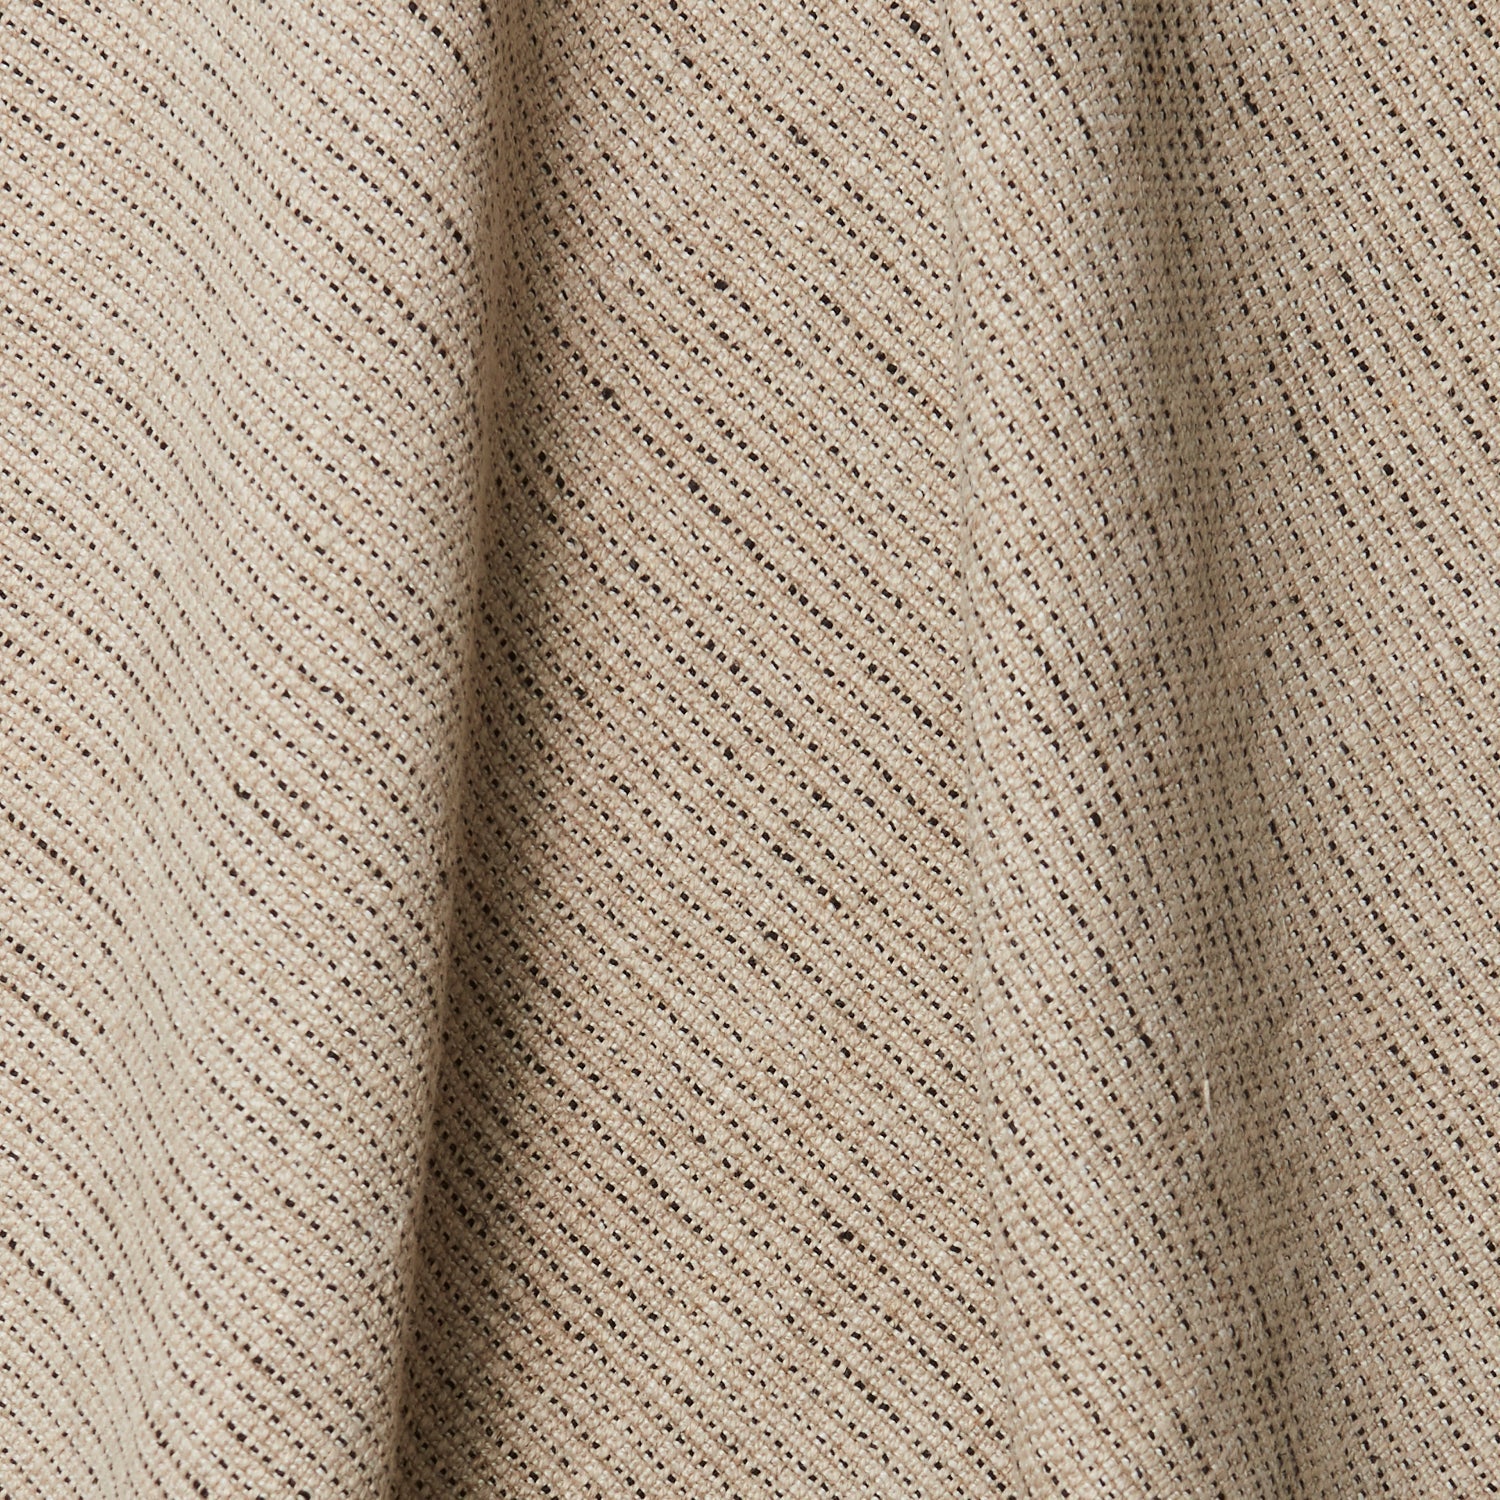 A draped swatch of linen fabric with a small-scale pattern of dark brown dashes on a tan background.